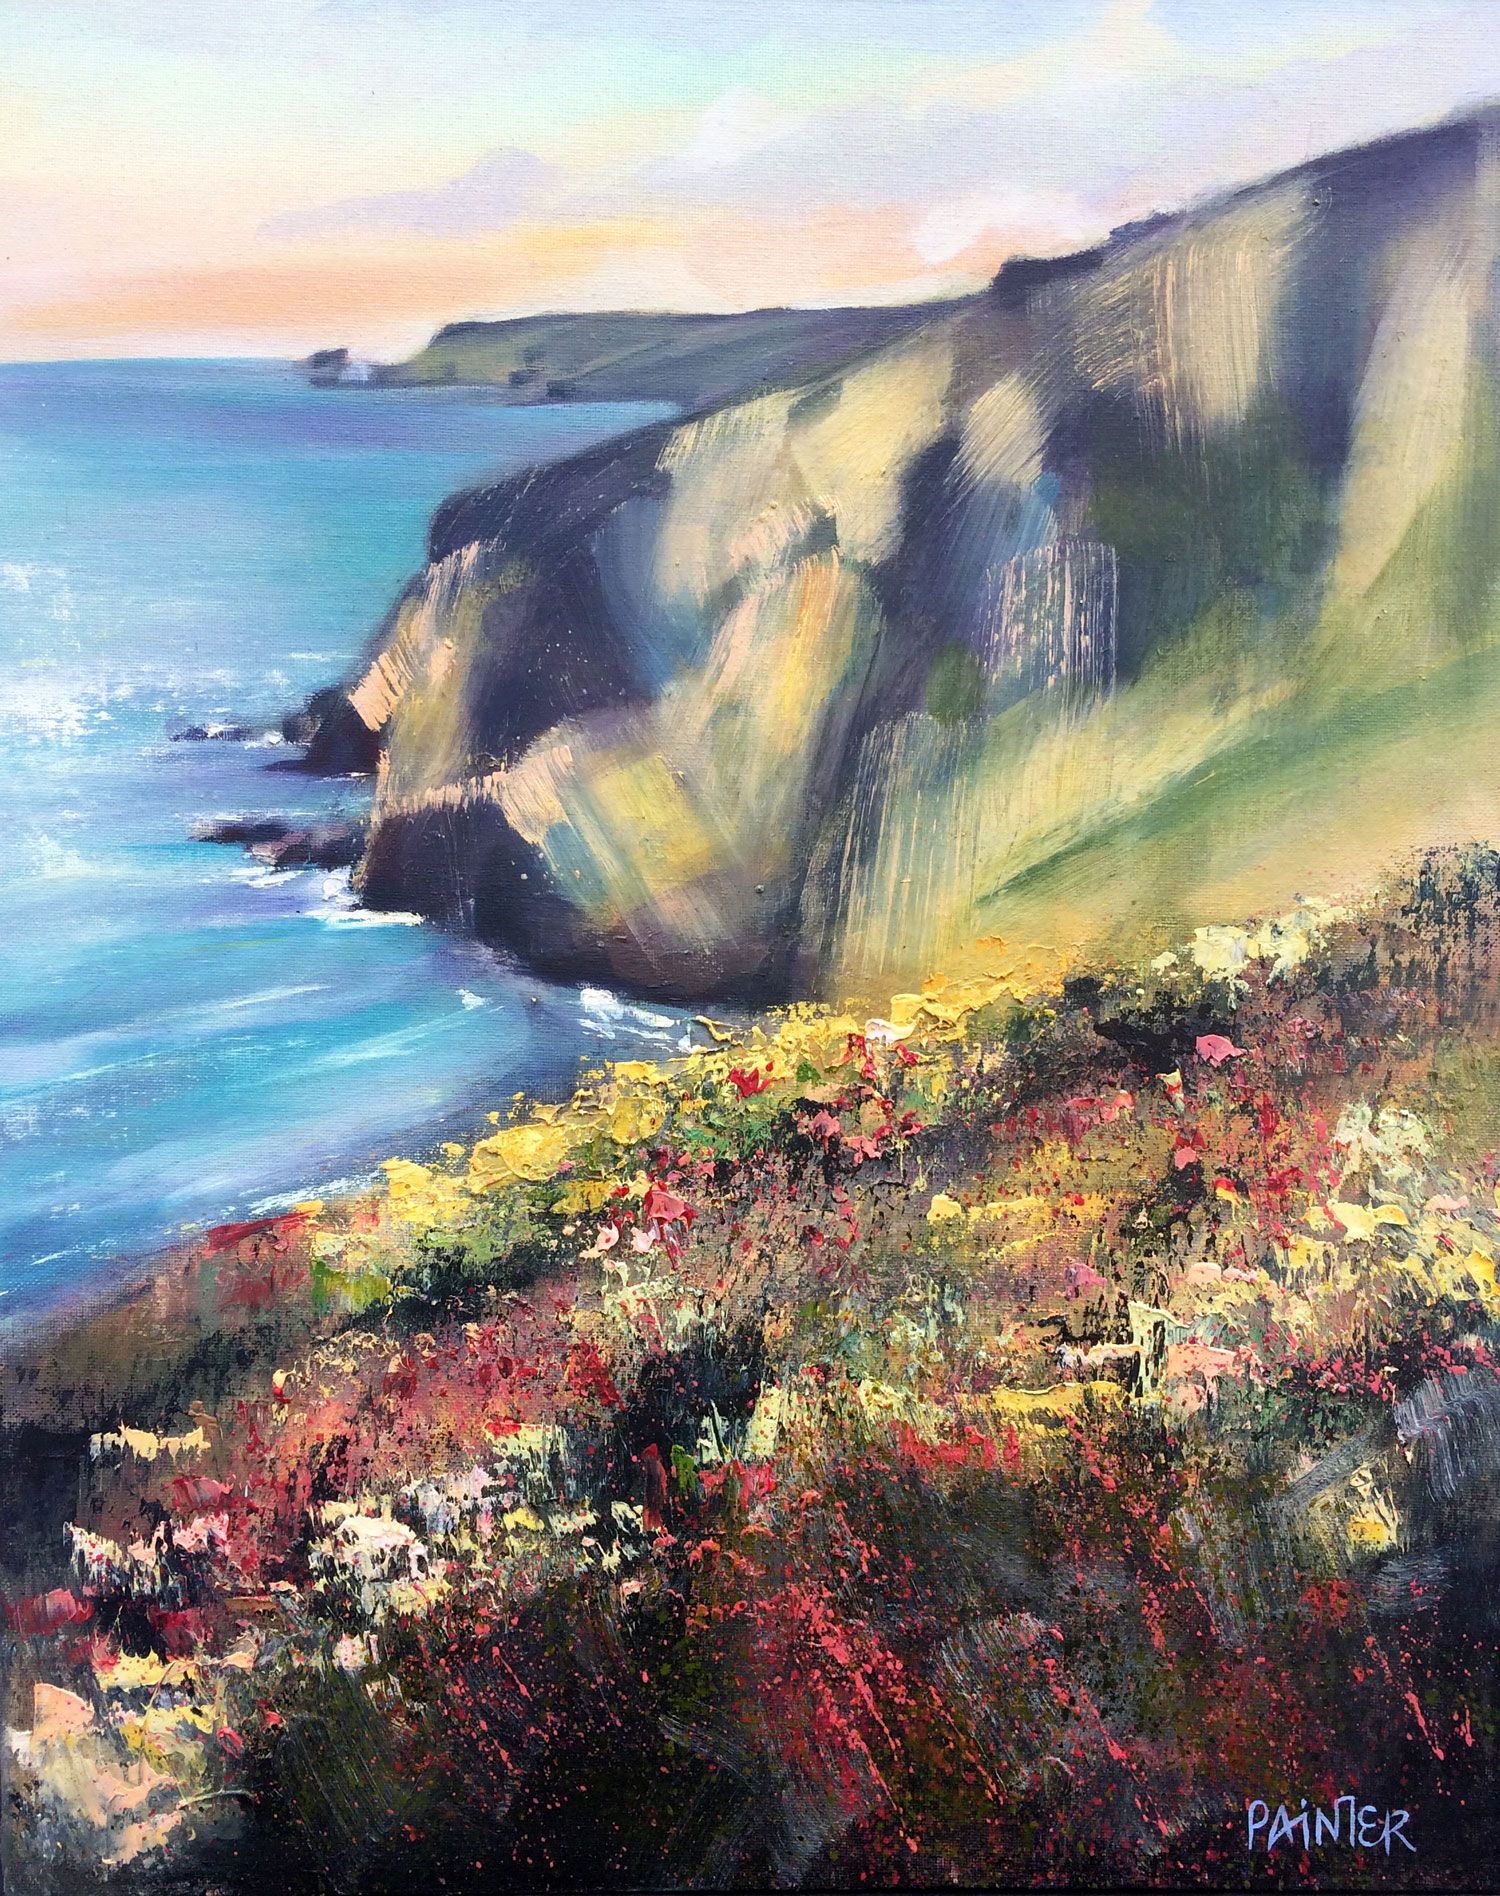 Robert Jones The North Cliffs, Natural Beauty For Sale At, 57% OFF